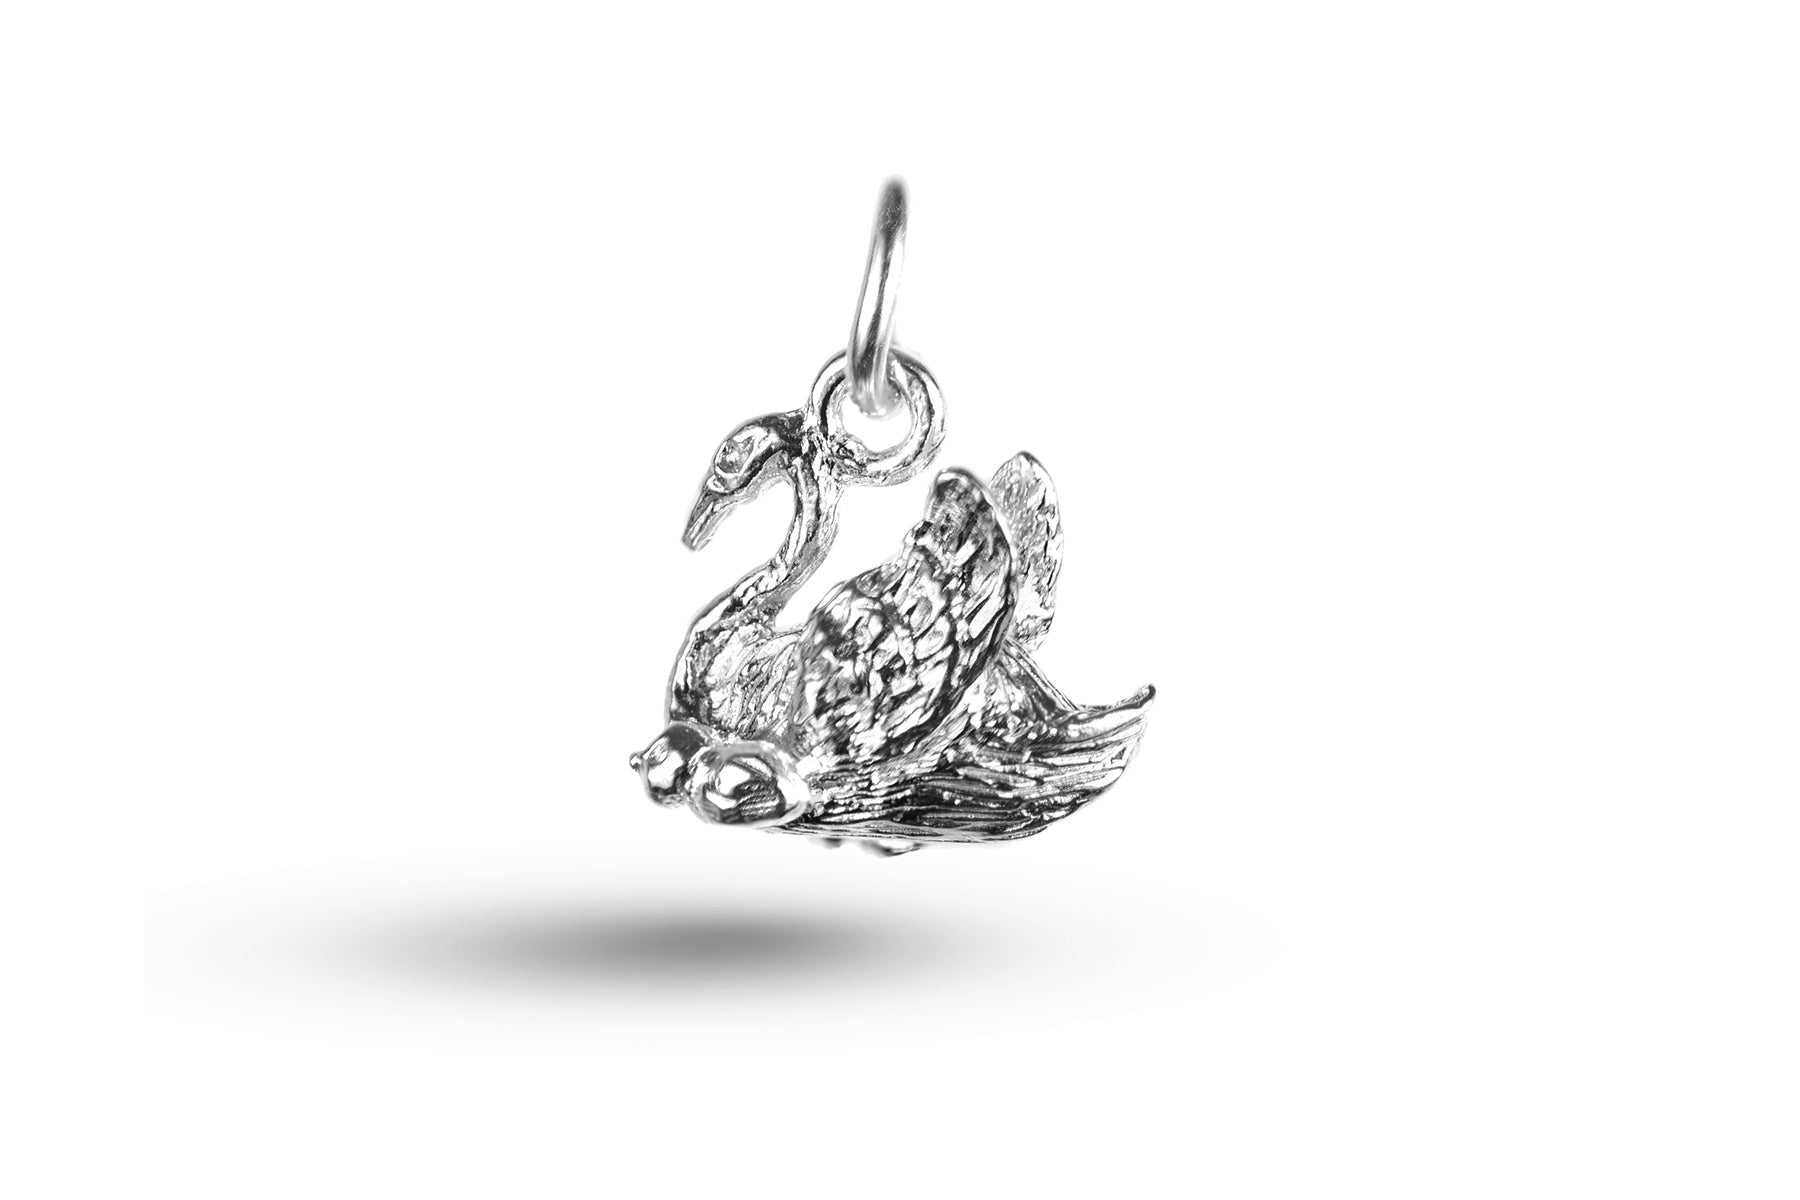 White gold Swan and Cygnet charm.